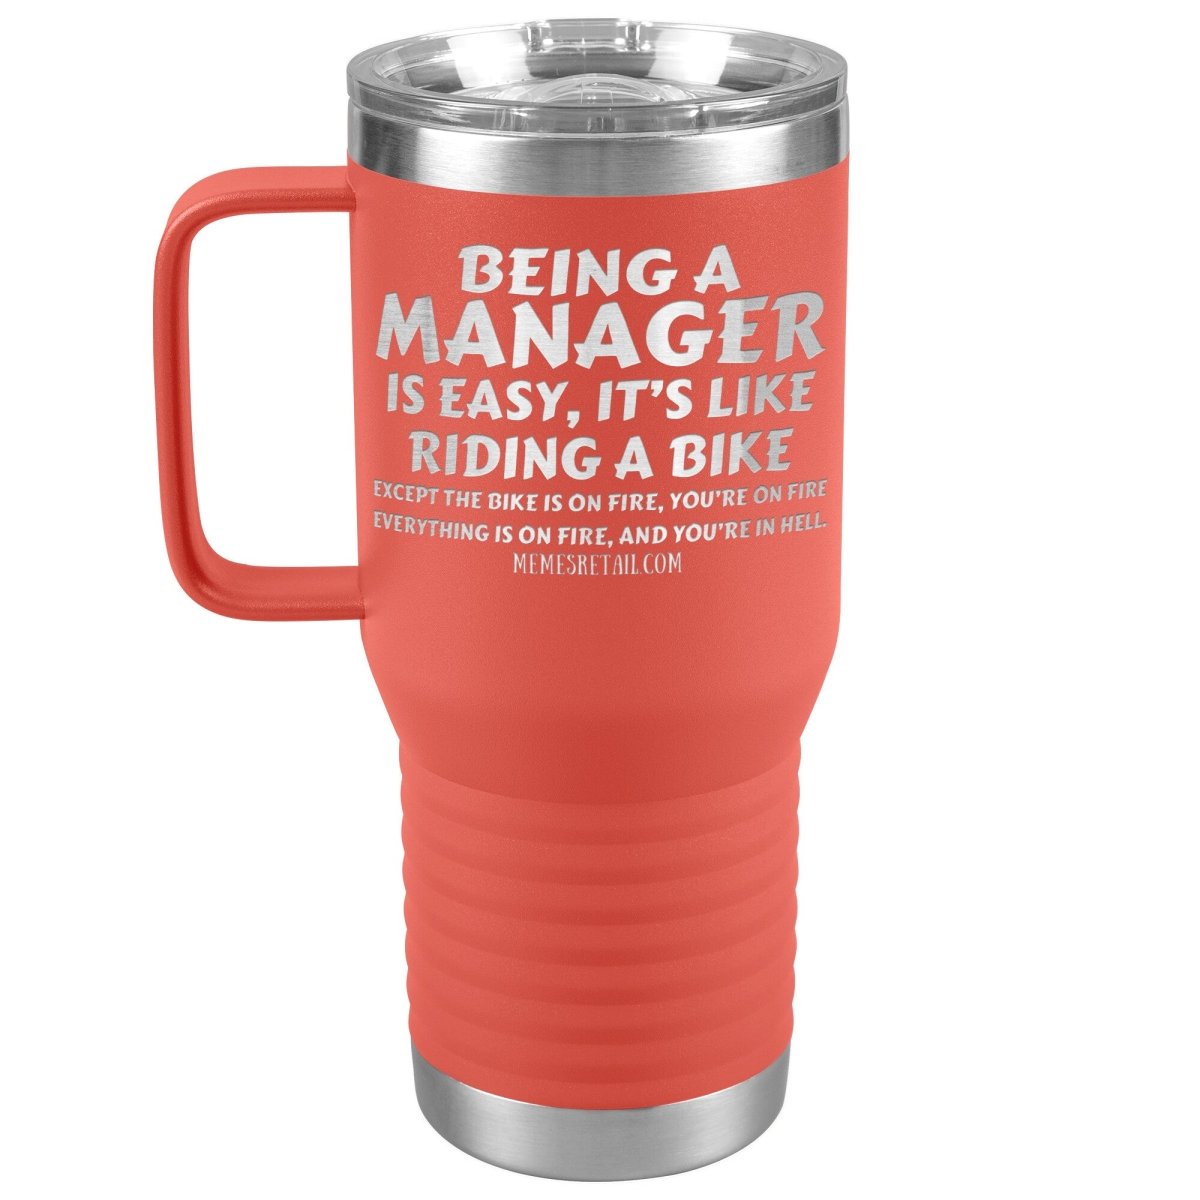 Being a manager is easy Tumblers, 20oz Travel Tumbler / Coral - MemesRetail.com